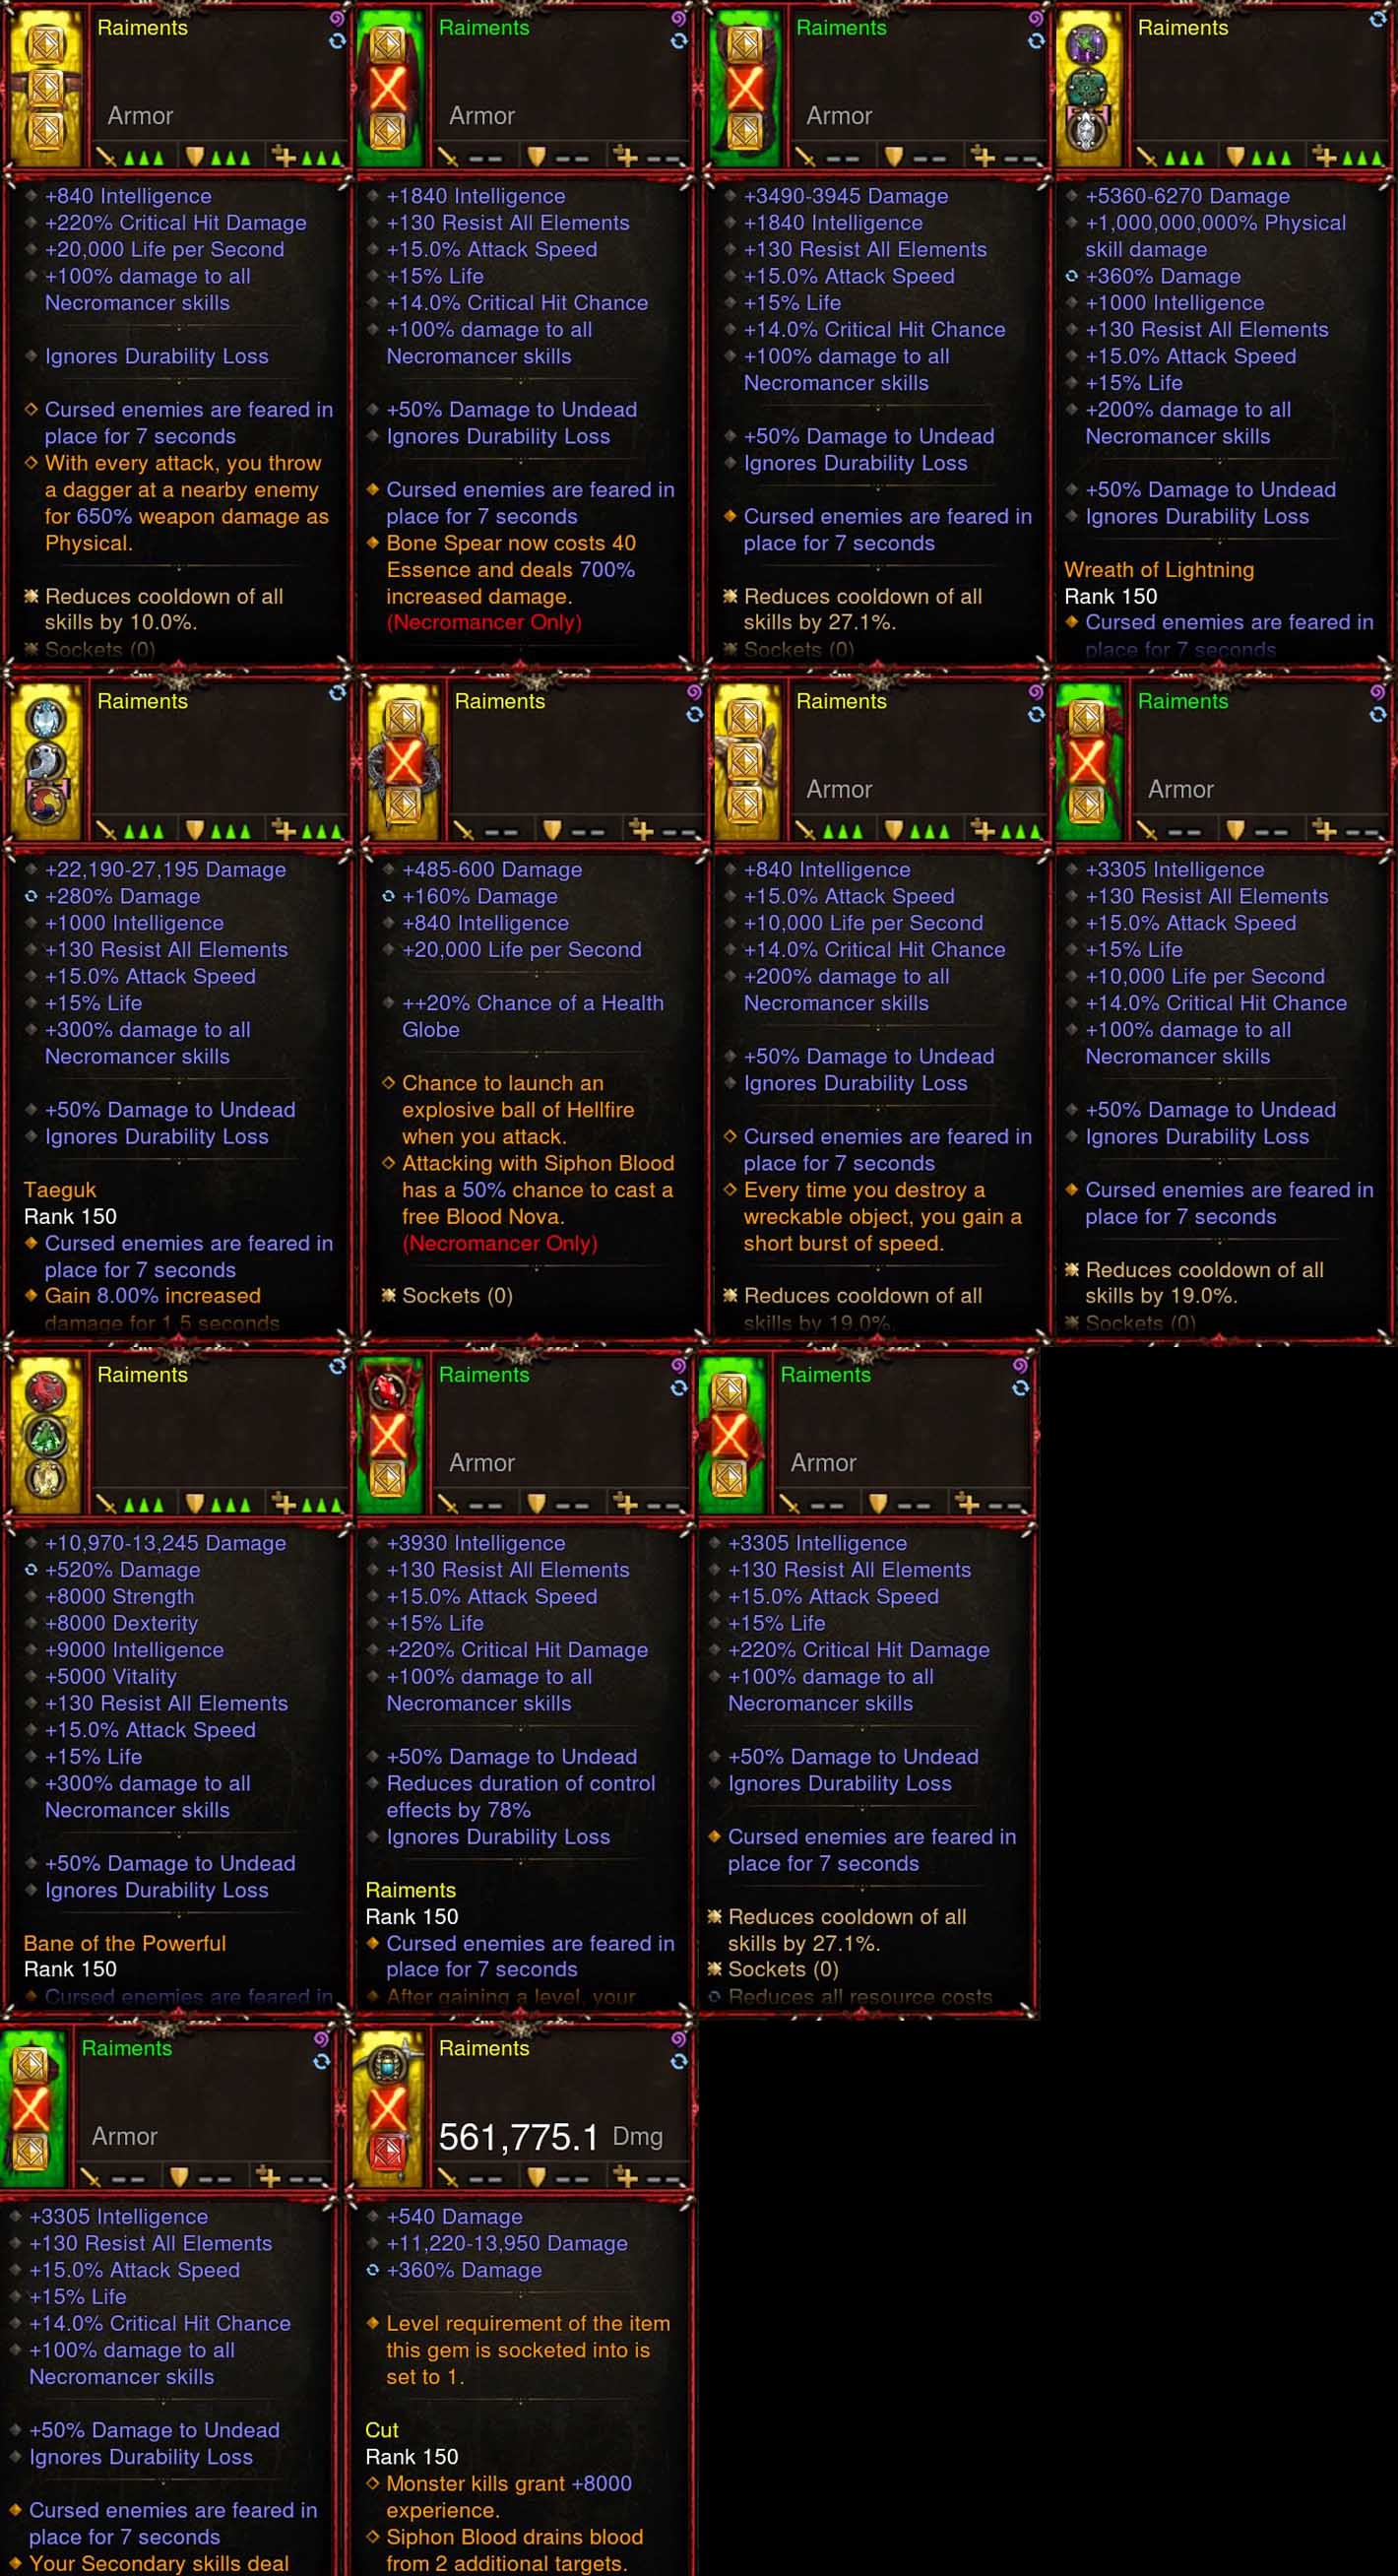 [Primal-Ethereal Infused Stats] [Quad] Diablo 3 IMv5 Tragouls Necromancer Set Raiments W3 Diablo 3 Mods ROS Seasonal and Non Seasonal Save Mod - Modded Items and Gear - Hacks - Cheats - Trainers for Playstation 4 - Playstation 5 - Nintendo Switch - Xbox One